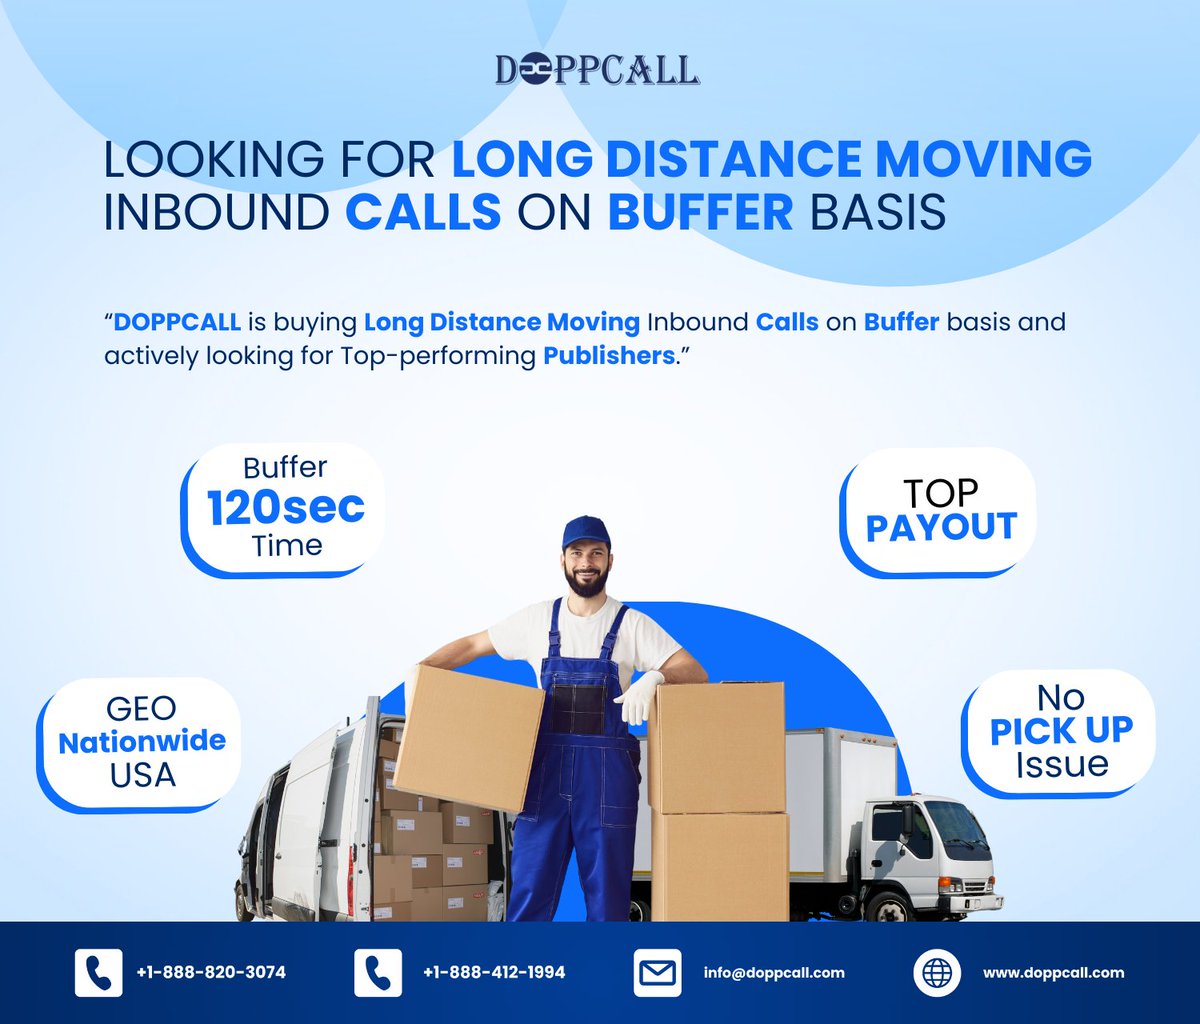 We've a high-demand for Long Distance Moving Inbound Calls and are actively looking for Top-performing Publishers.

If you have inbound calls (no transfers), please contact us:

📧 info@doppcall.com
☎️ +1-888-820-3074 or +1-888-412-1994
🌐 doppcall.com/publisher/sign…

#InboundCalls